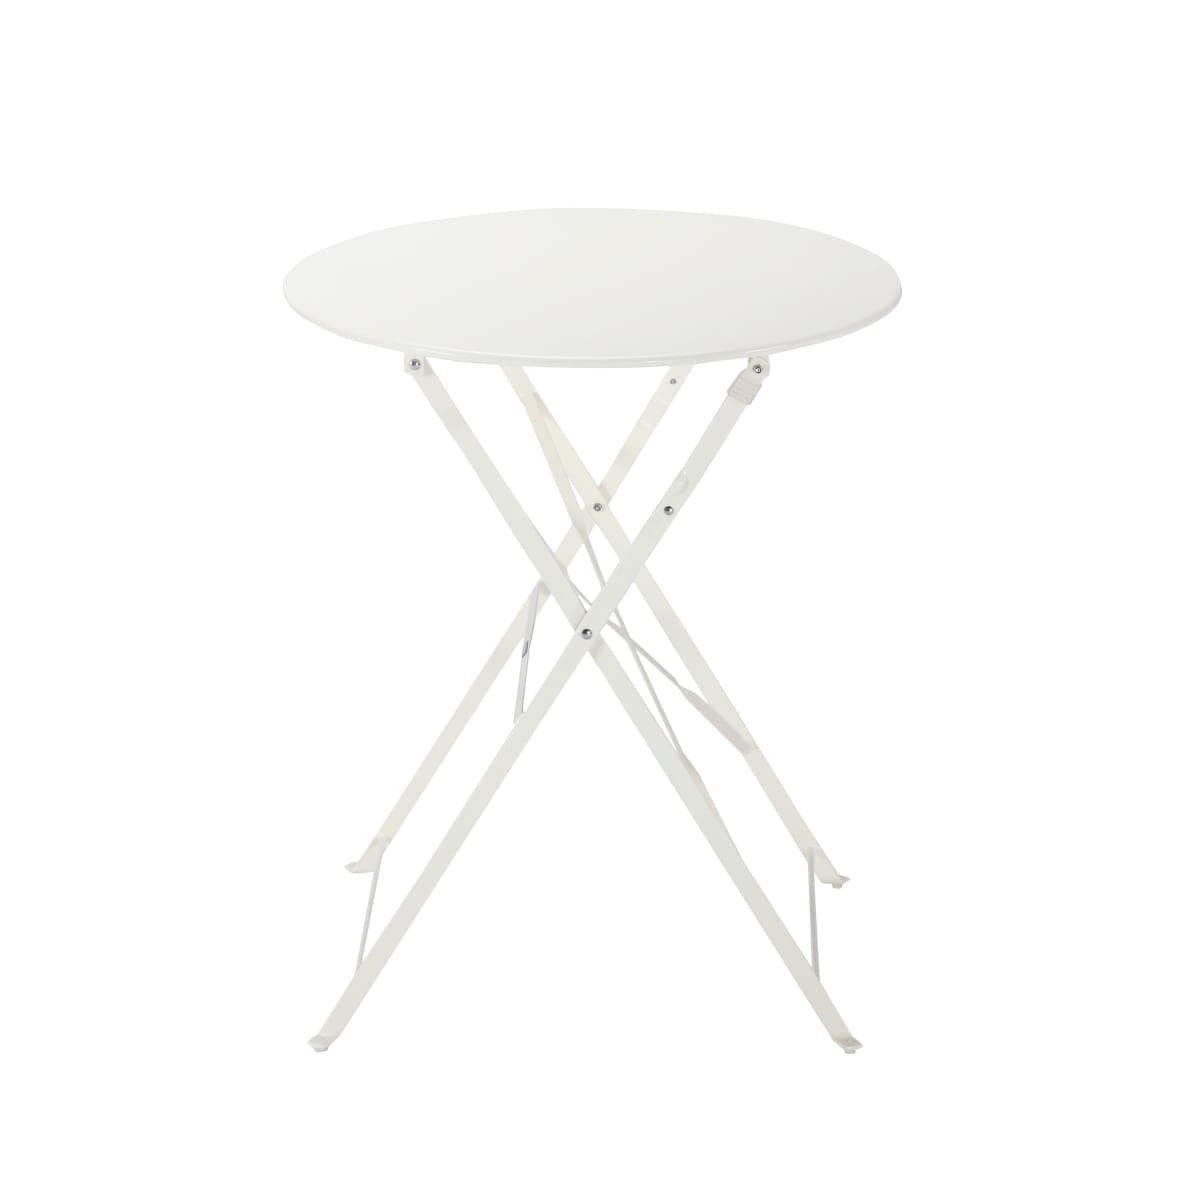 FLORA NATERIAL FOLDING TABLE 2 PLACES ROUND STEEL D 60XH71 - best price from Maltashopper.com BR500009666